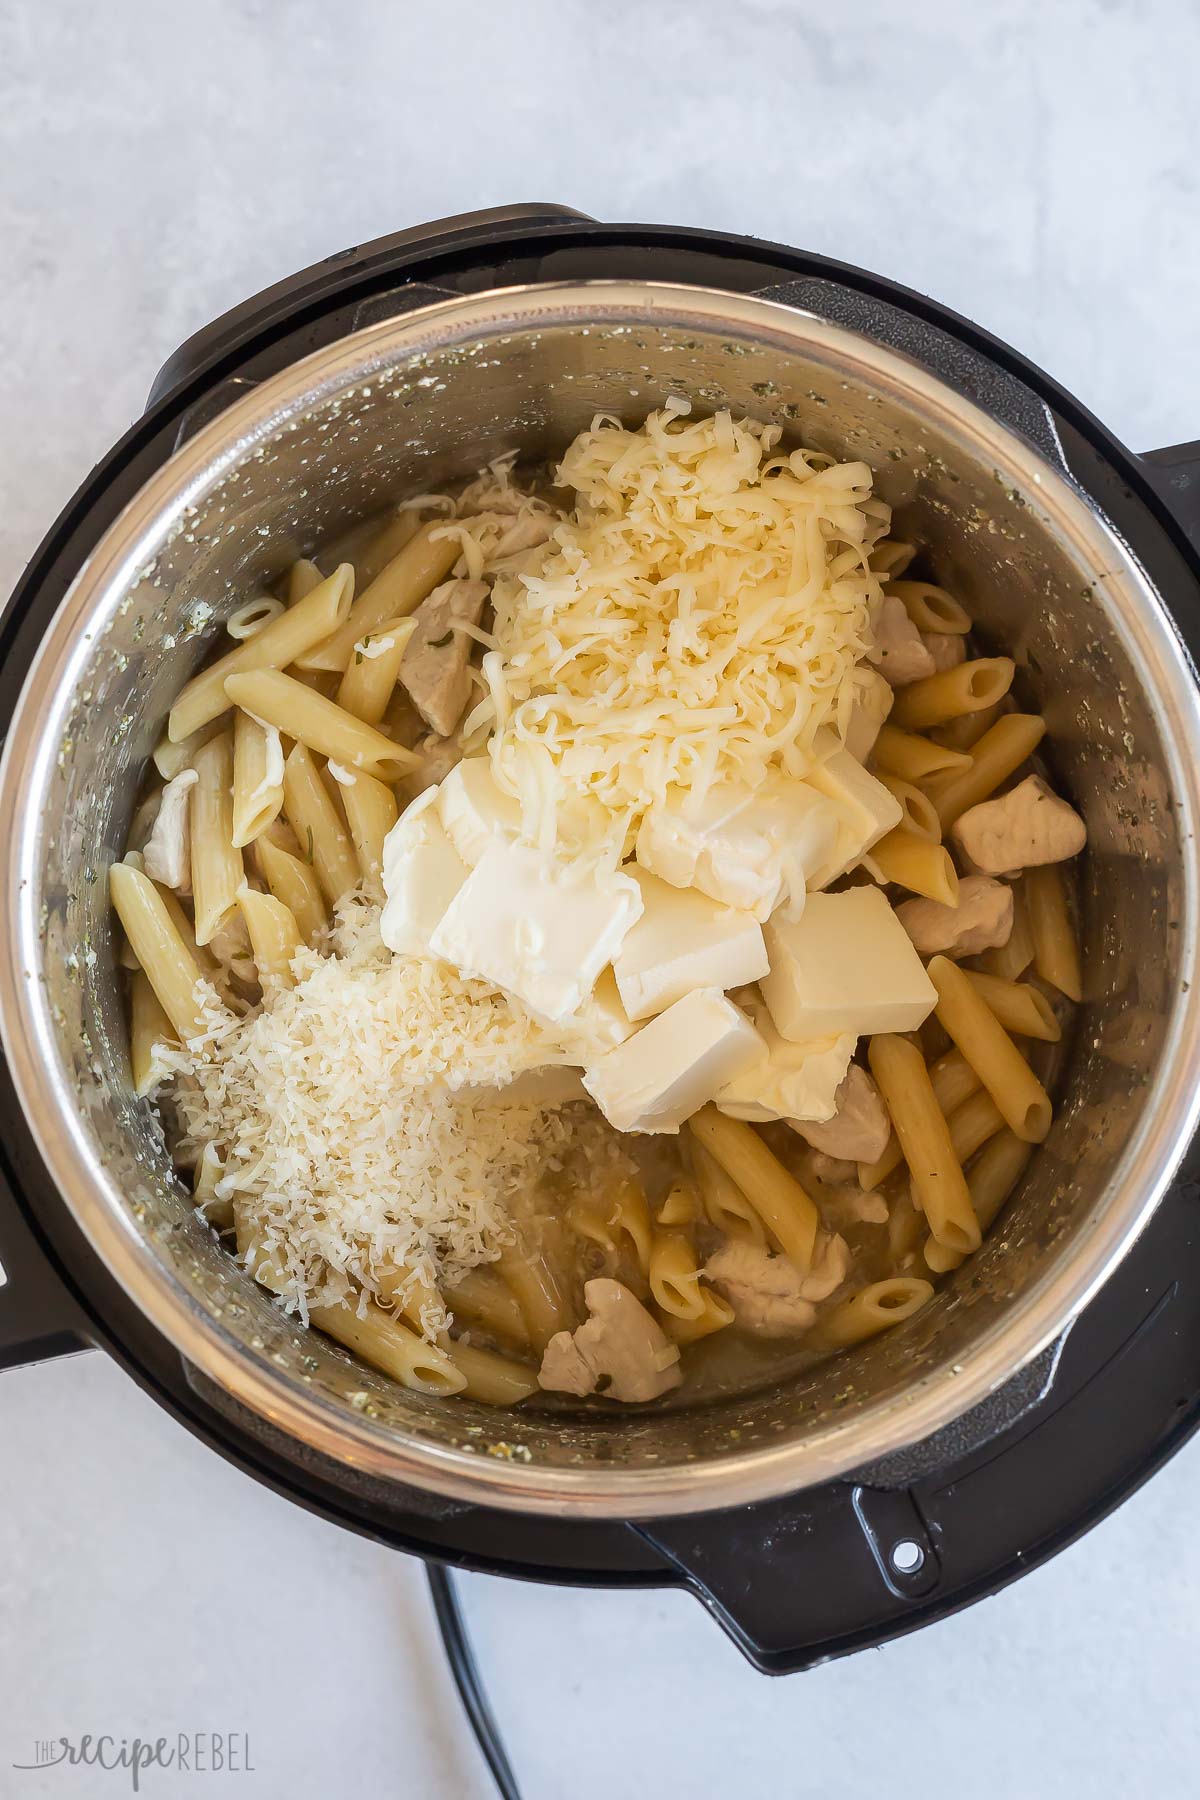 cream cheese and cheese added to pasta in instant pot.